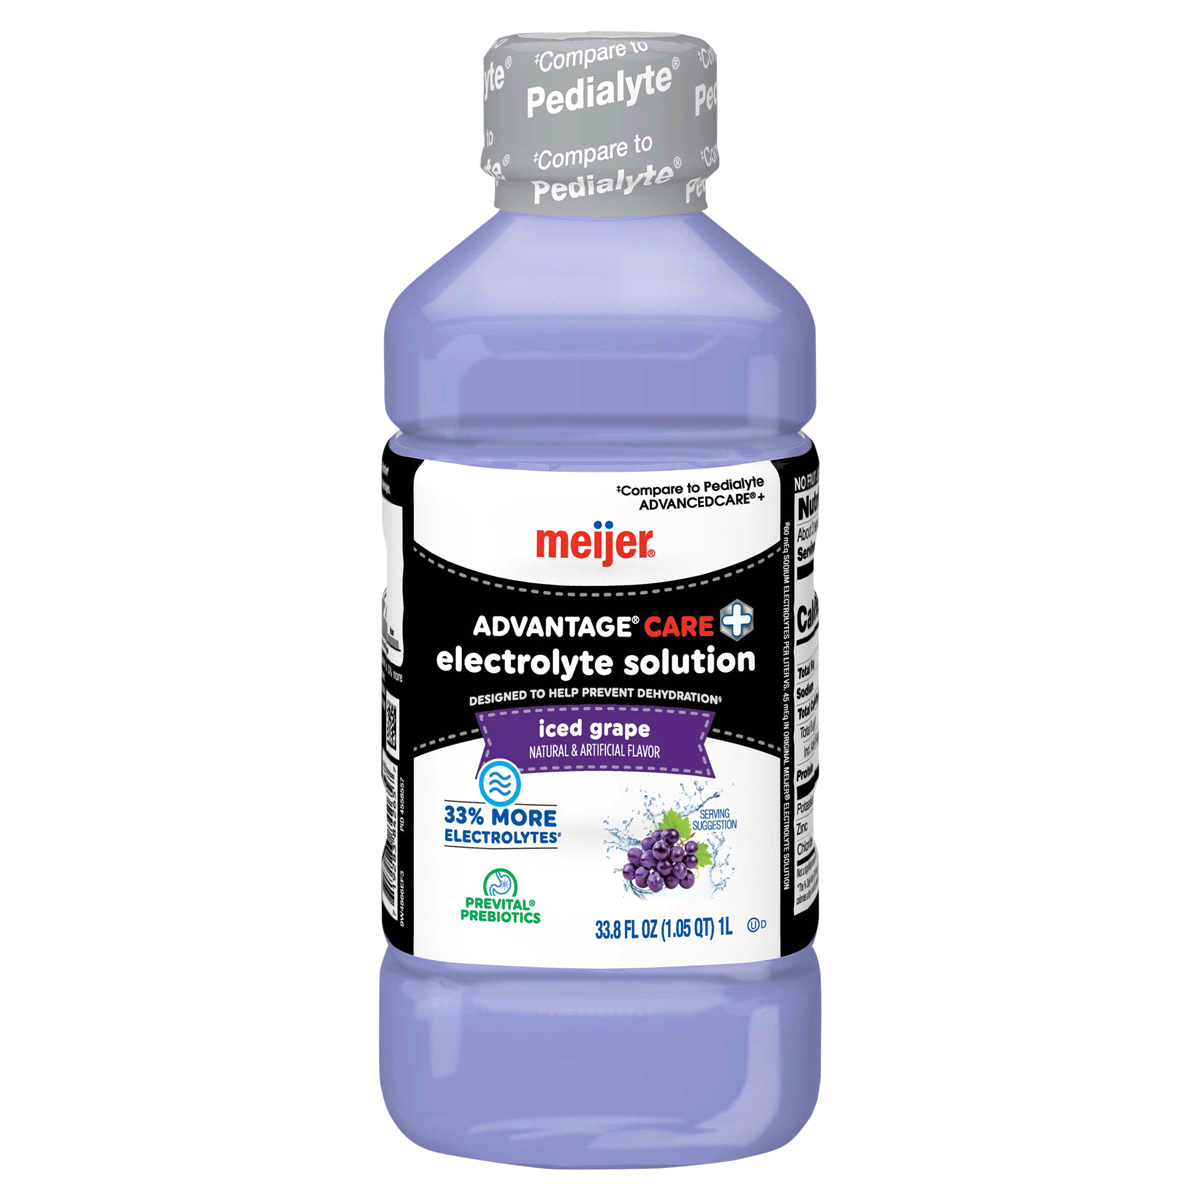 slide 1 of 28, Meijer Advantage Care Plus Adult Electrolyte Solution With Zinc, 33% More Electrolytes and PreVital Prebiotics, Iced Grape, 1 liter